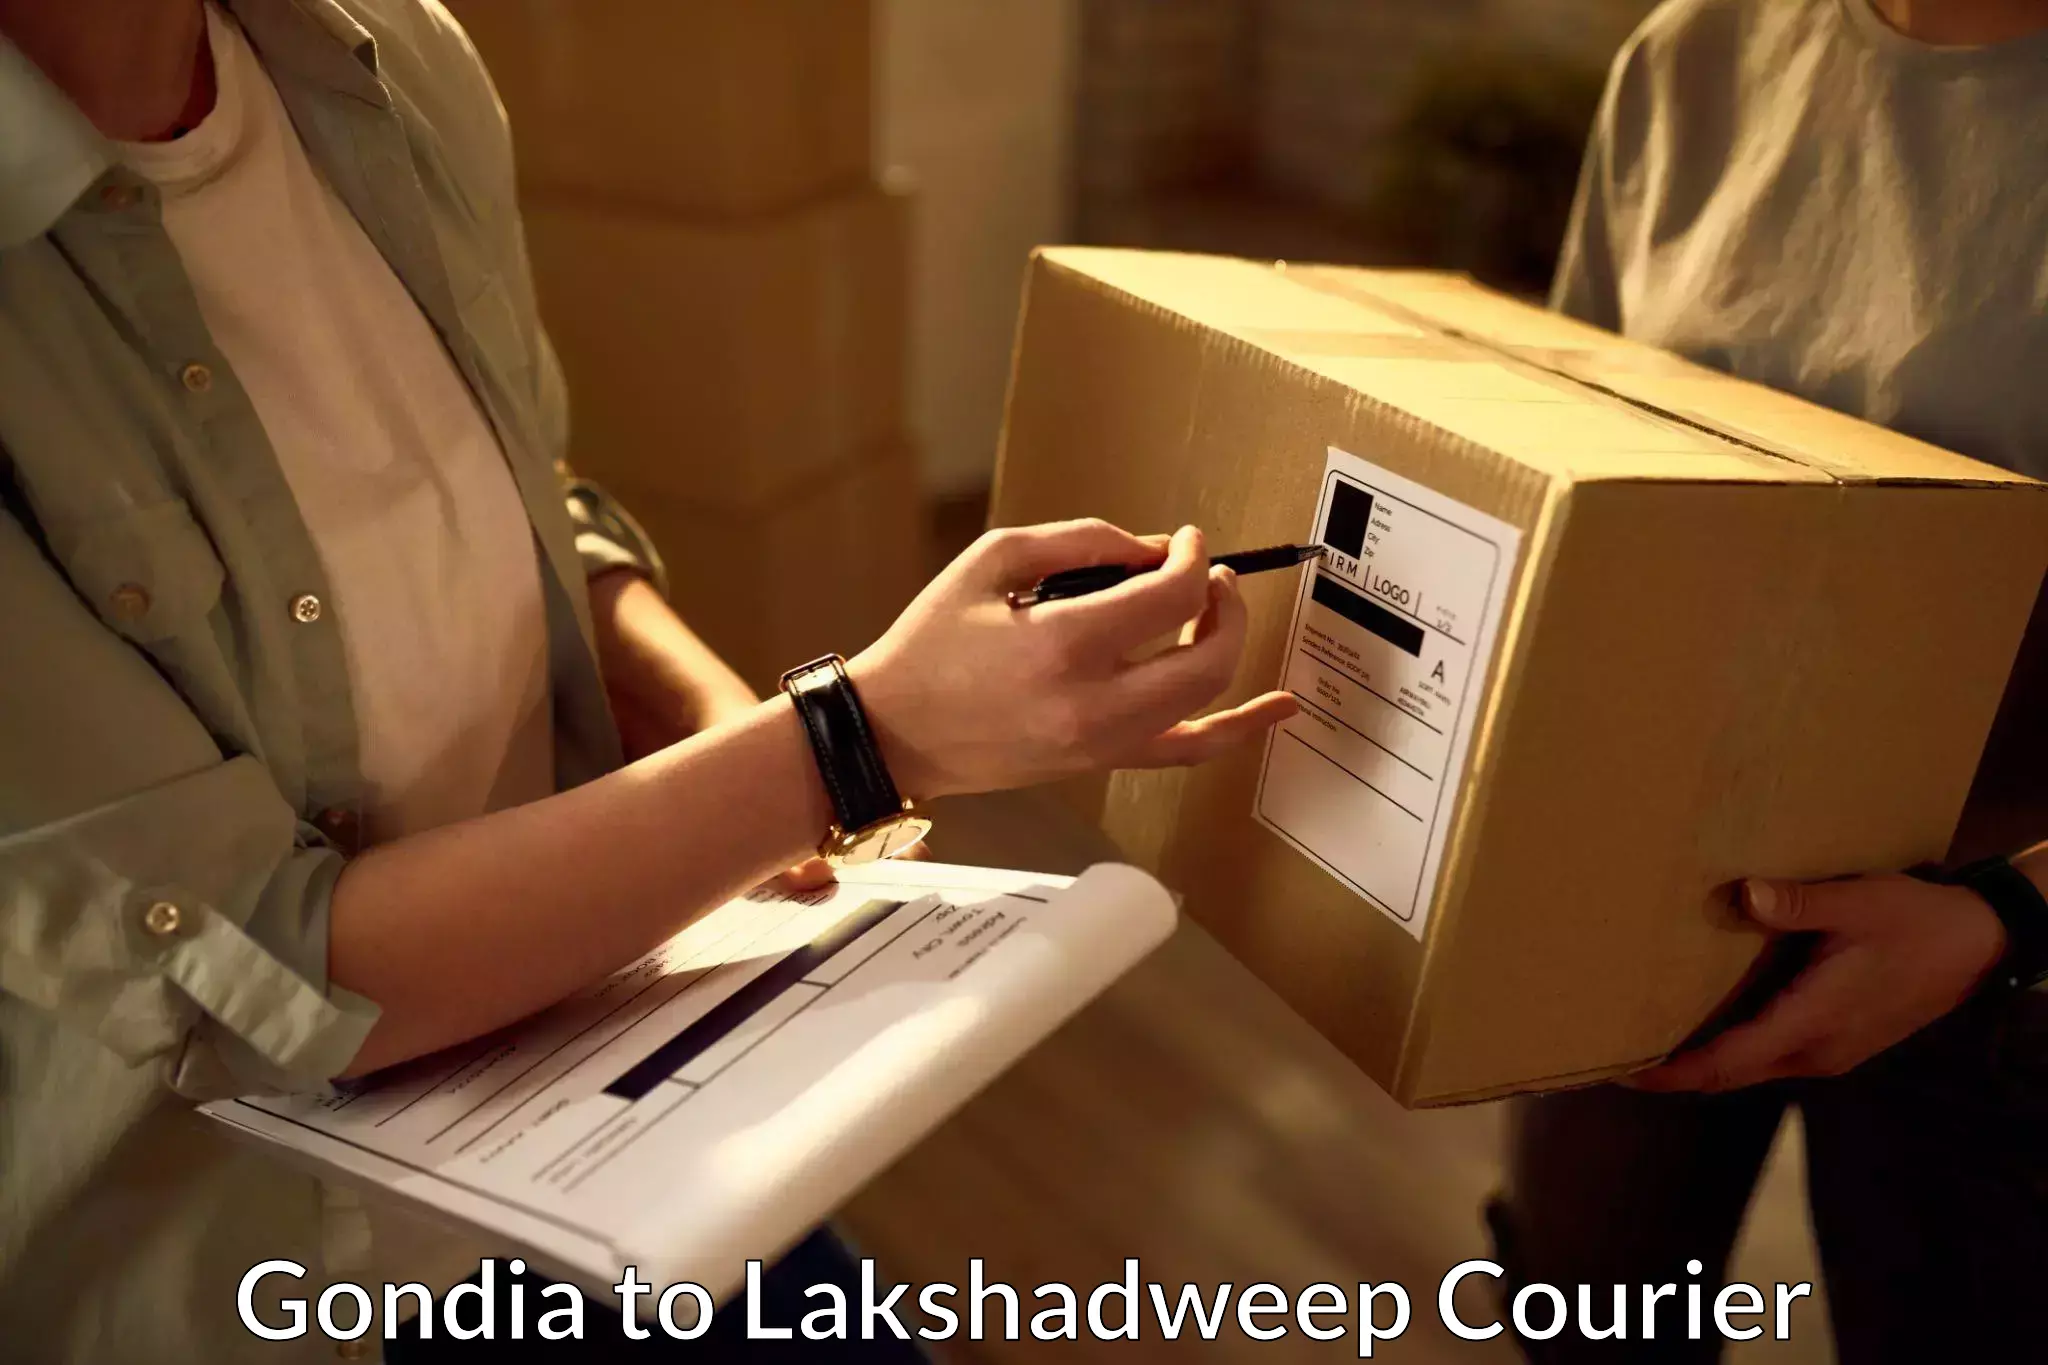 Courier service comparison Gondia to Lakshadweep